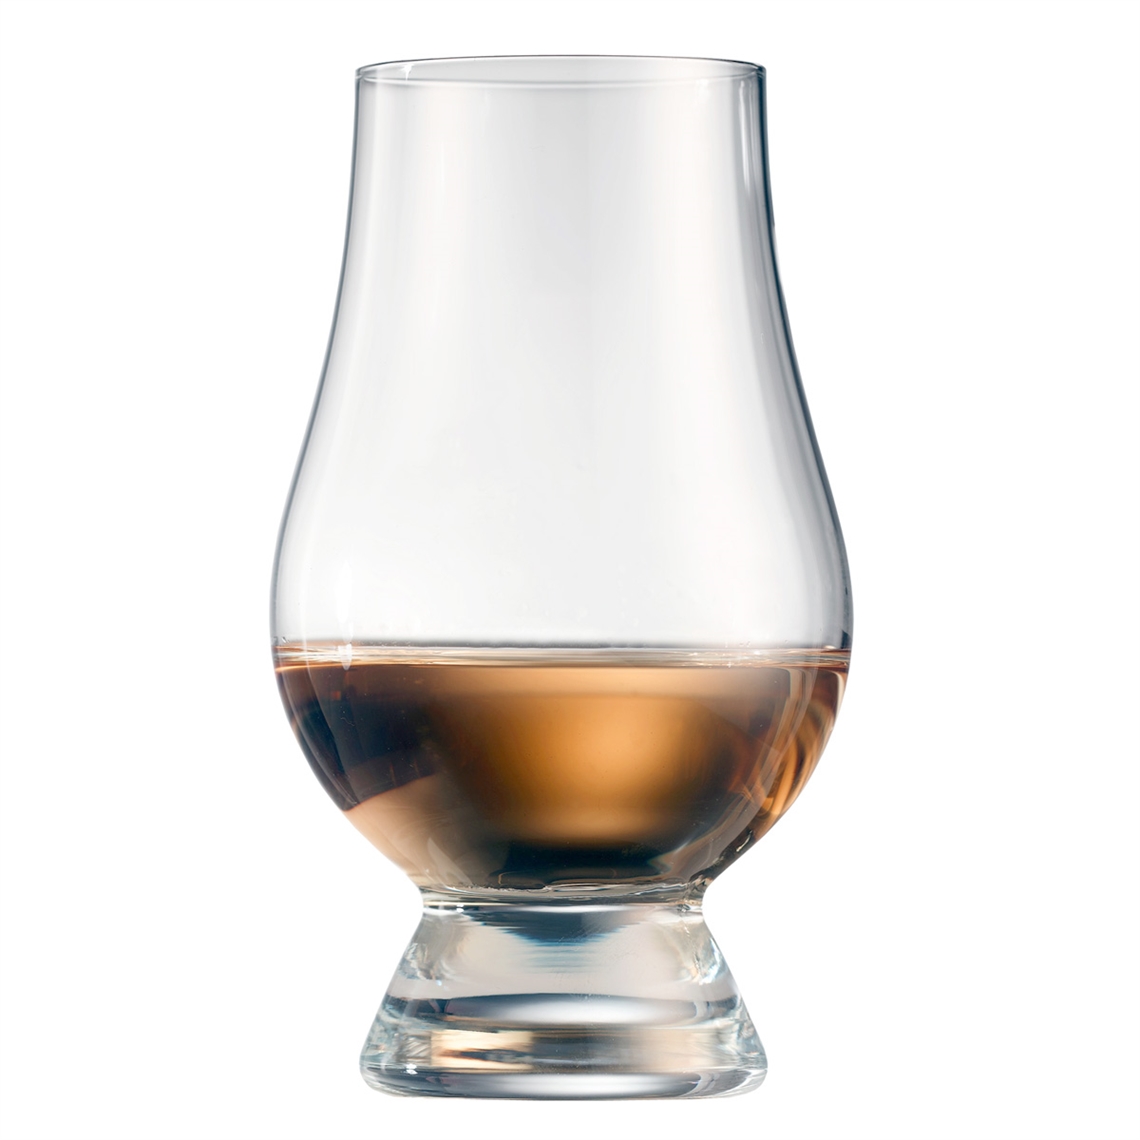 View more burgundy wine glasses from our Whisky Glasses range